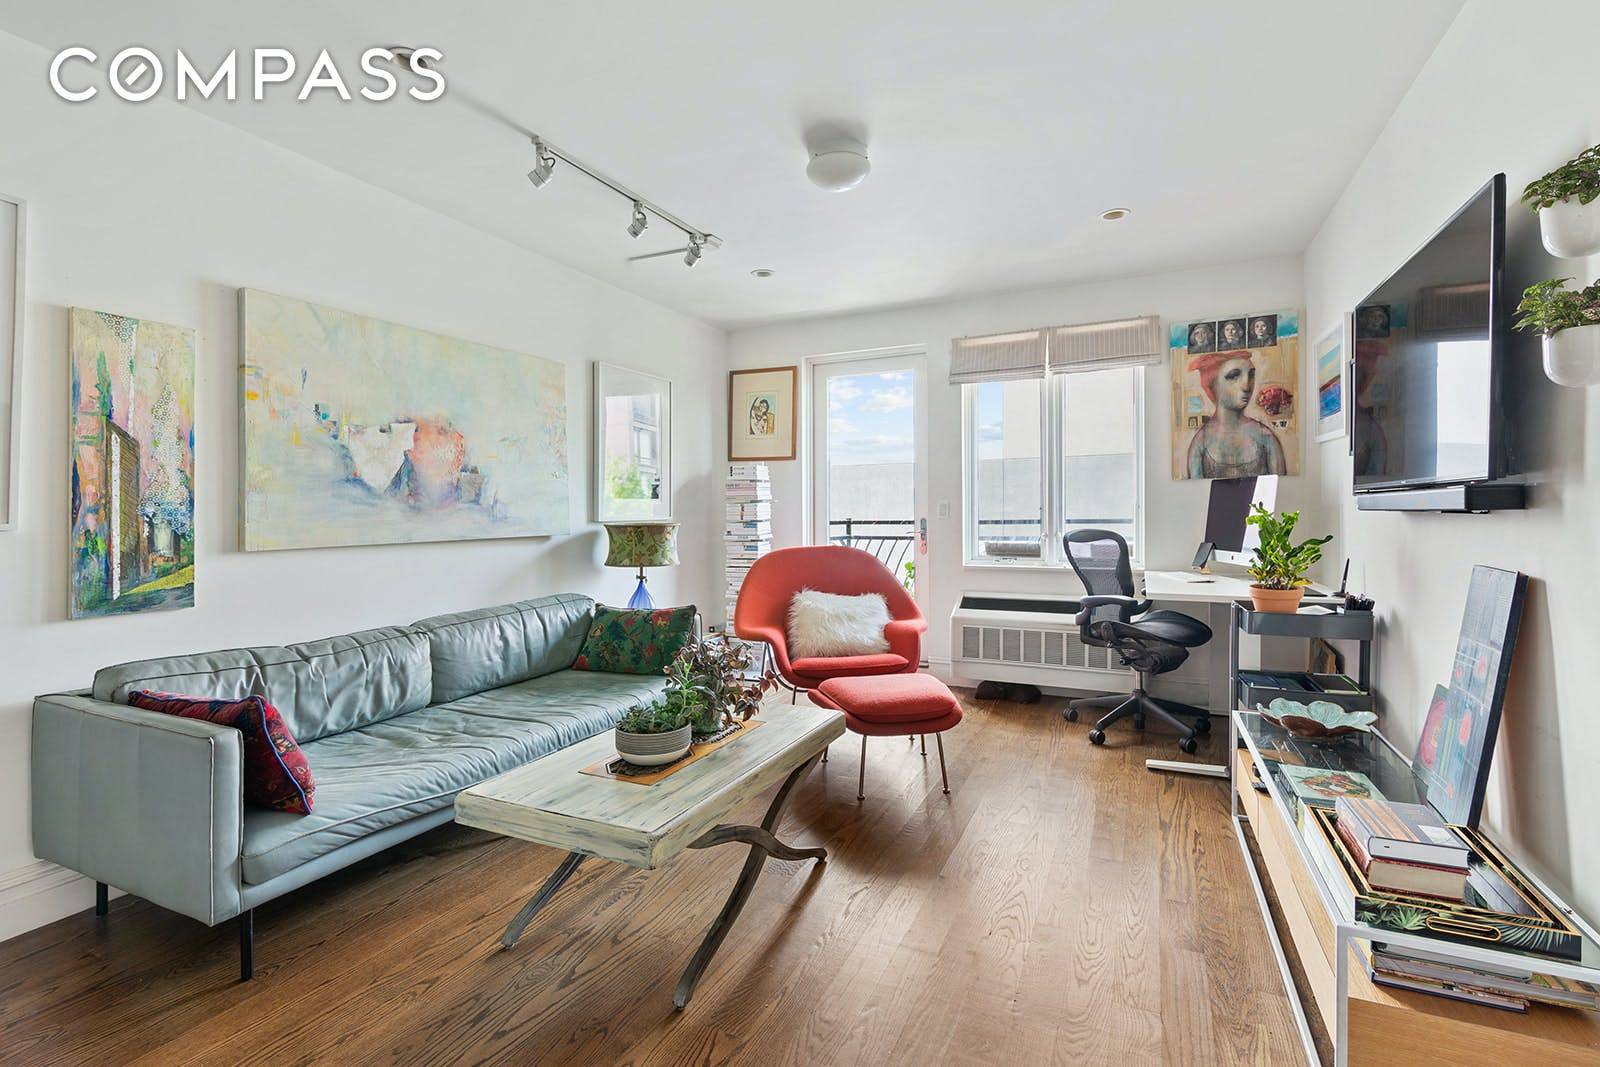 A beautifully appointed one bedroom, rarely available in this Brooklyn inspired boutique condominium.